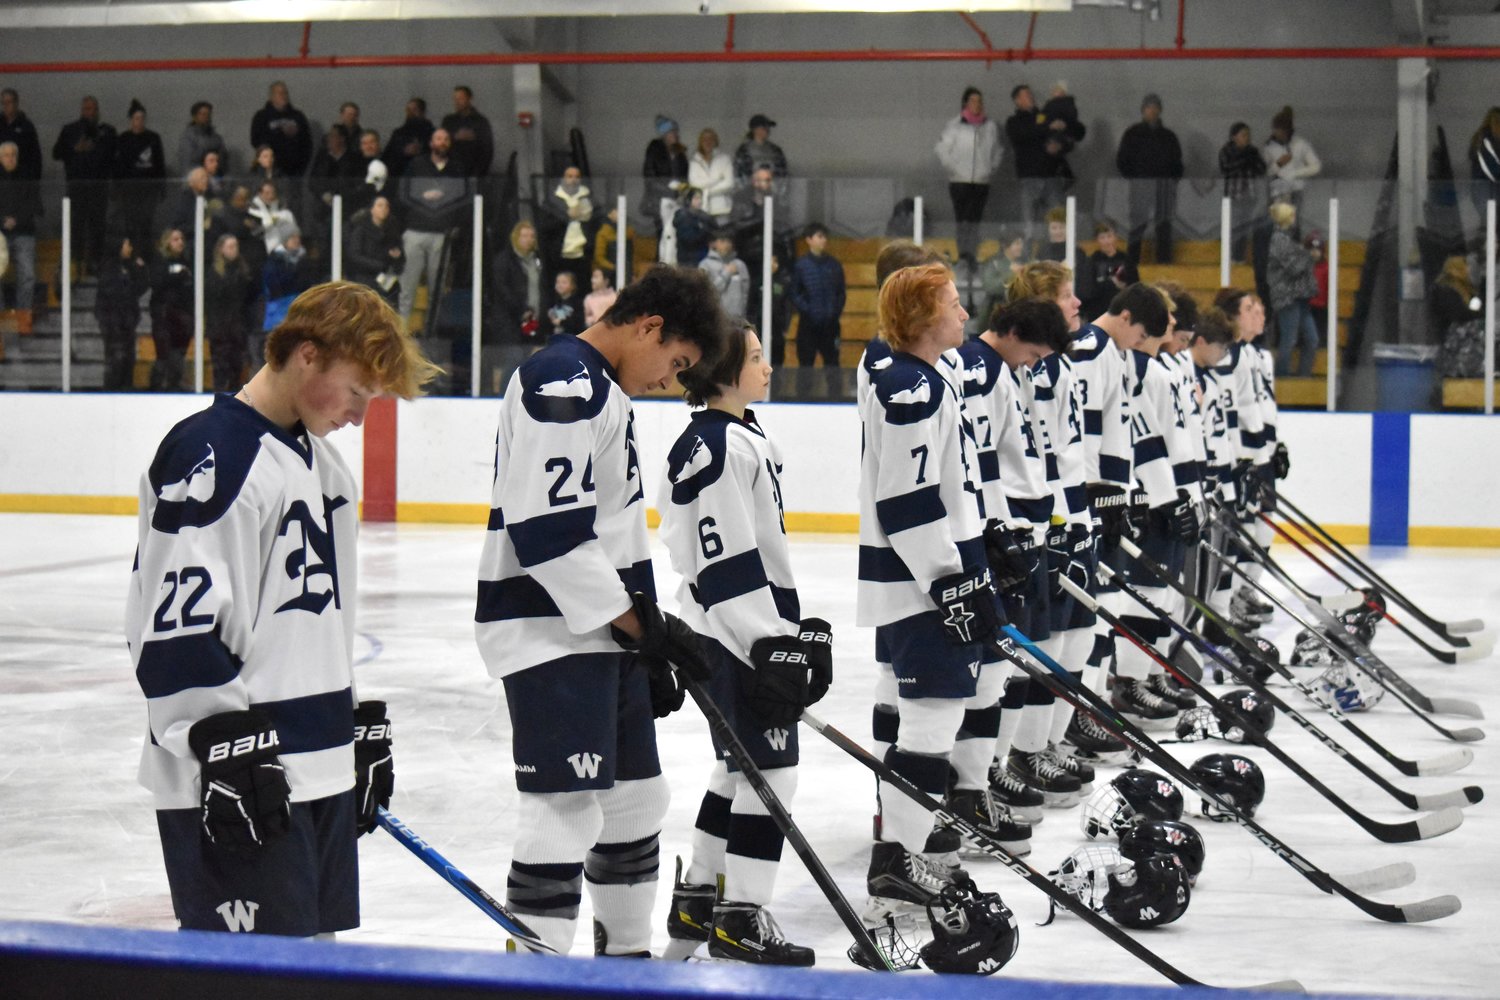 The Whalers boys hockey team ahead of Saturday's game against Barnstable.